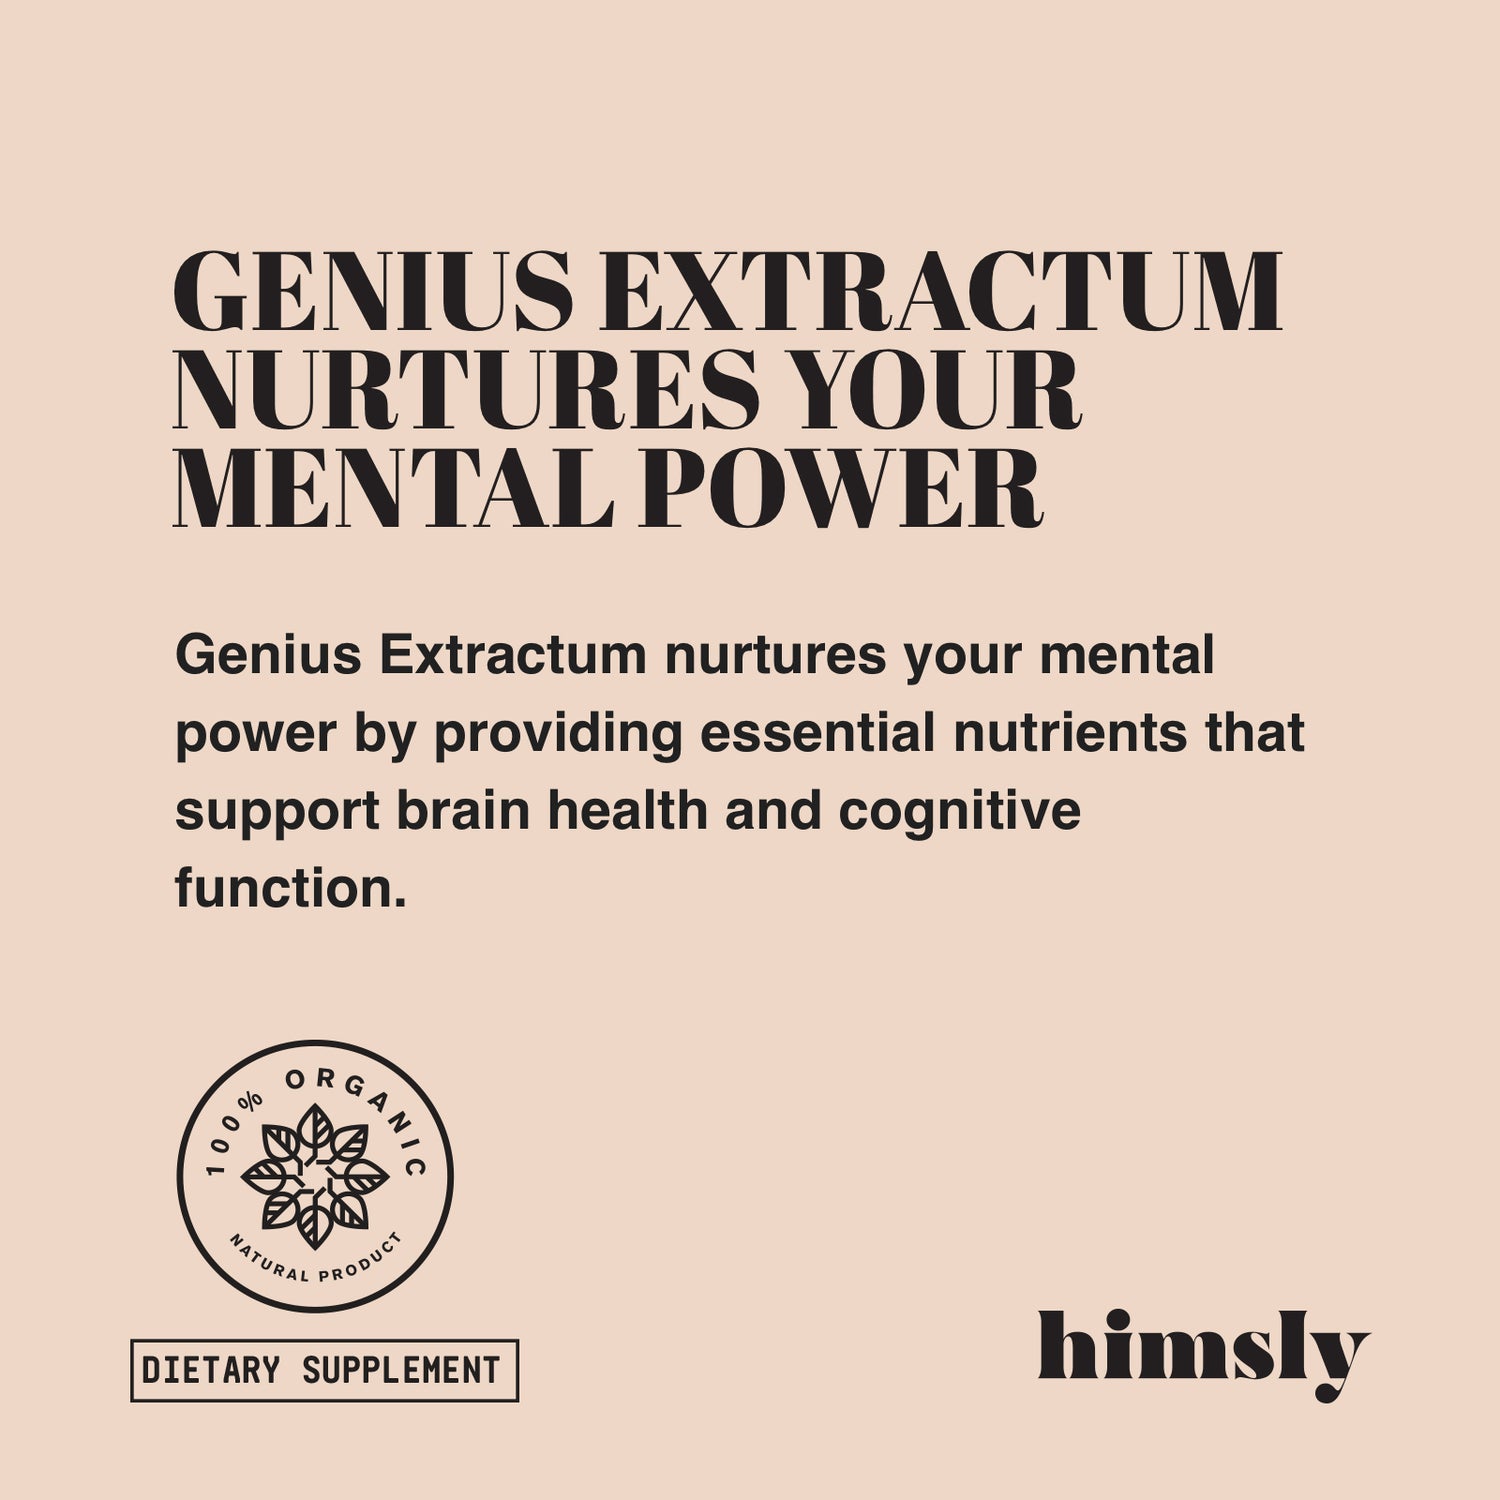 Genius Extractum nurtures your mental power by providing essential nutrients that support brain health and cognitive function.